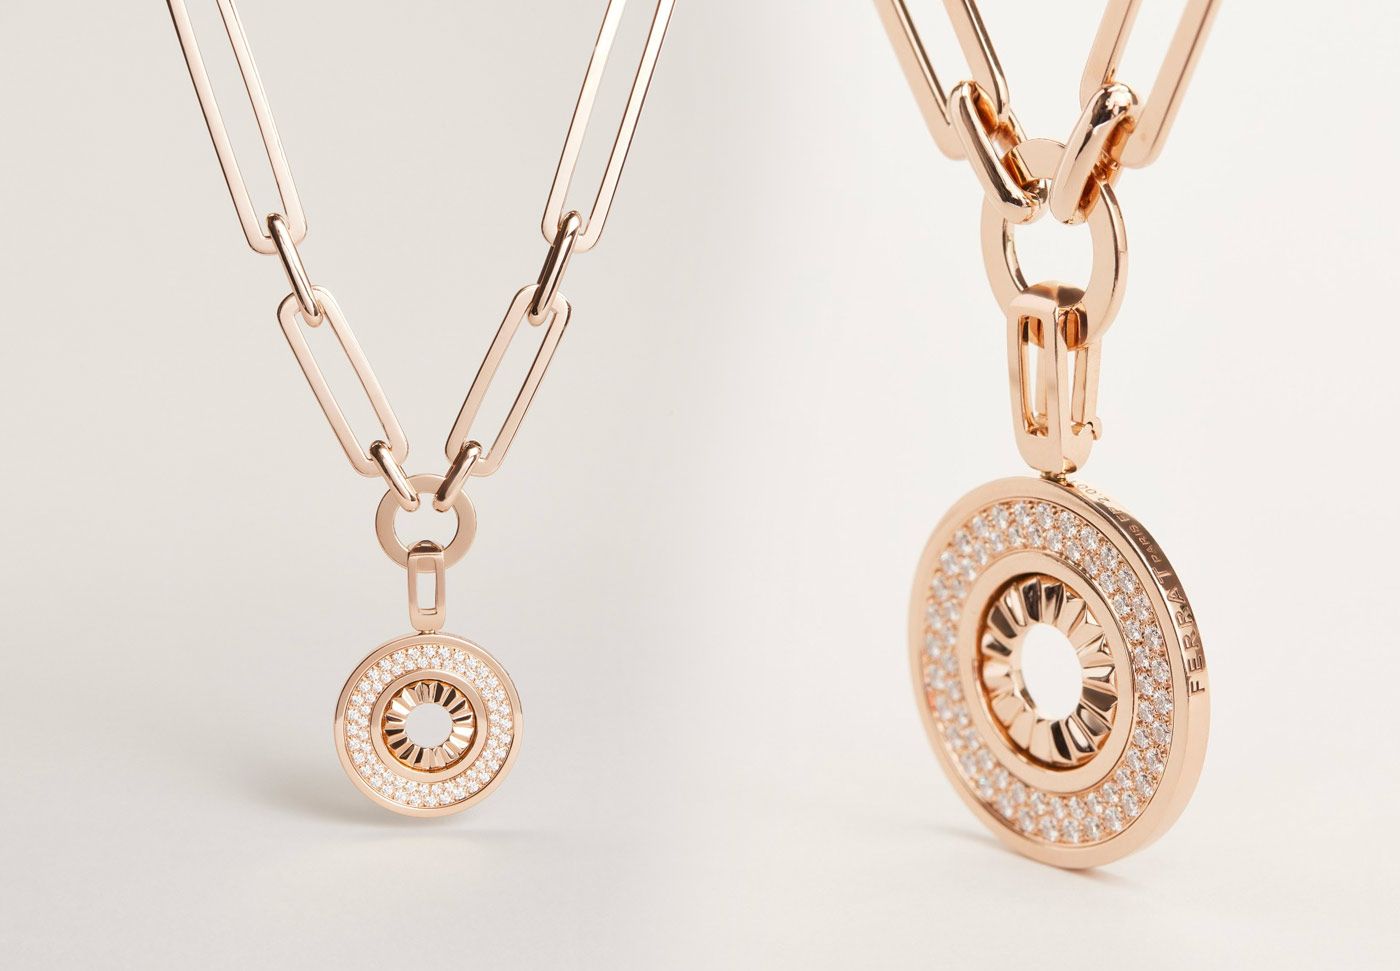 Ferrat Paris Persona Internal Ray necklace with diamonds in rose gold